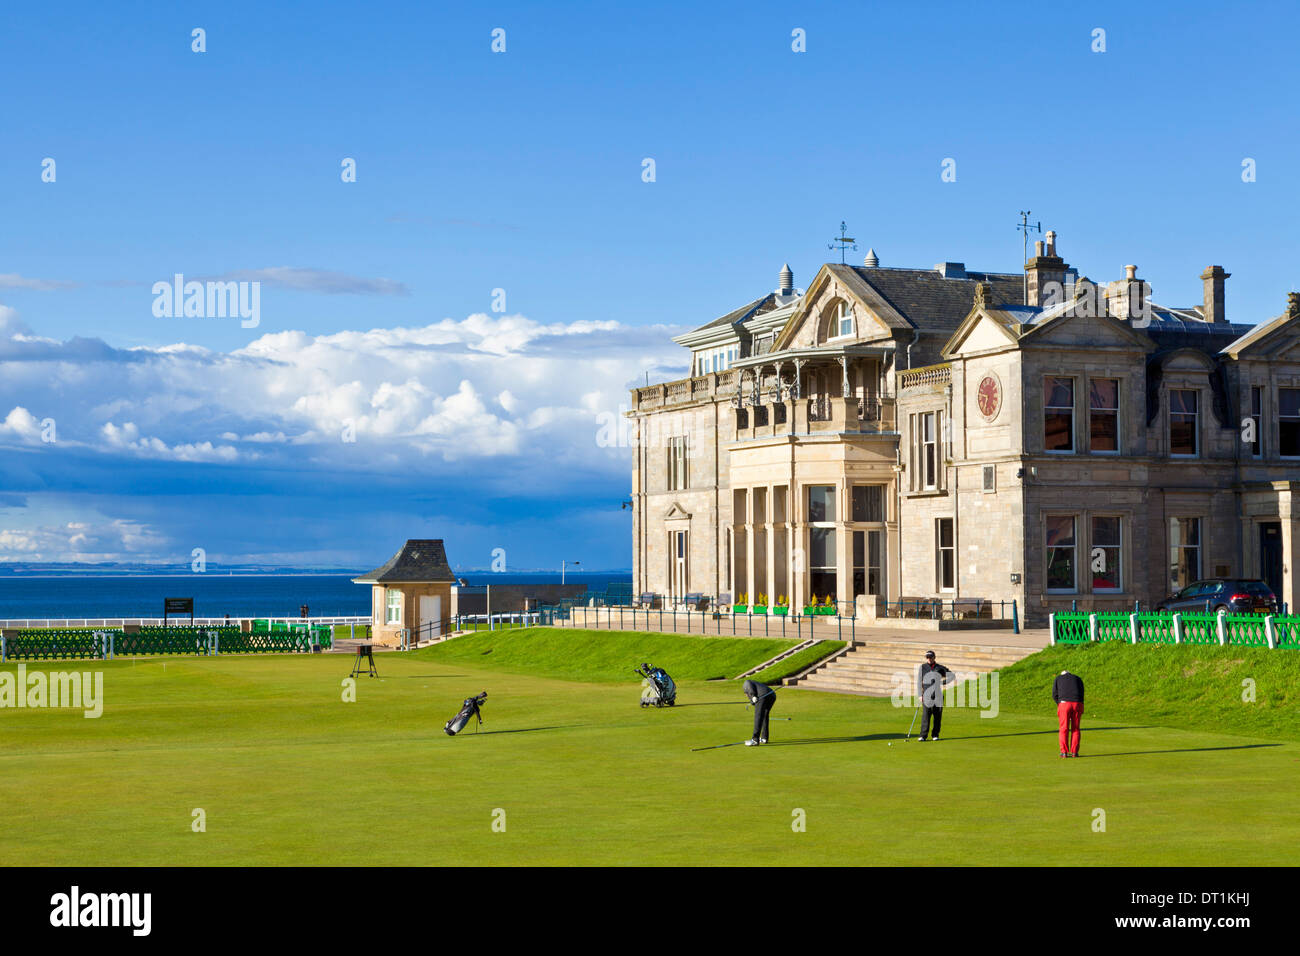 Golf course and club house, The Royal and Ancient Golf Club of St. Andrews, St. Andrews, Fife, Scotland, United Kingdom, Europe Stock Photo